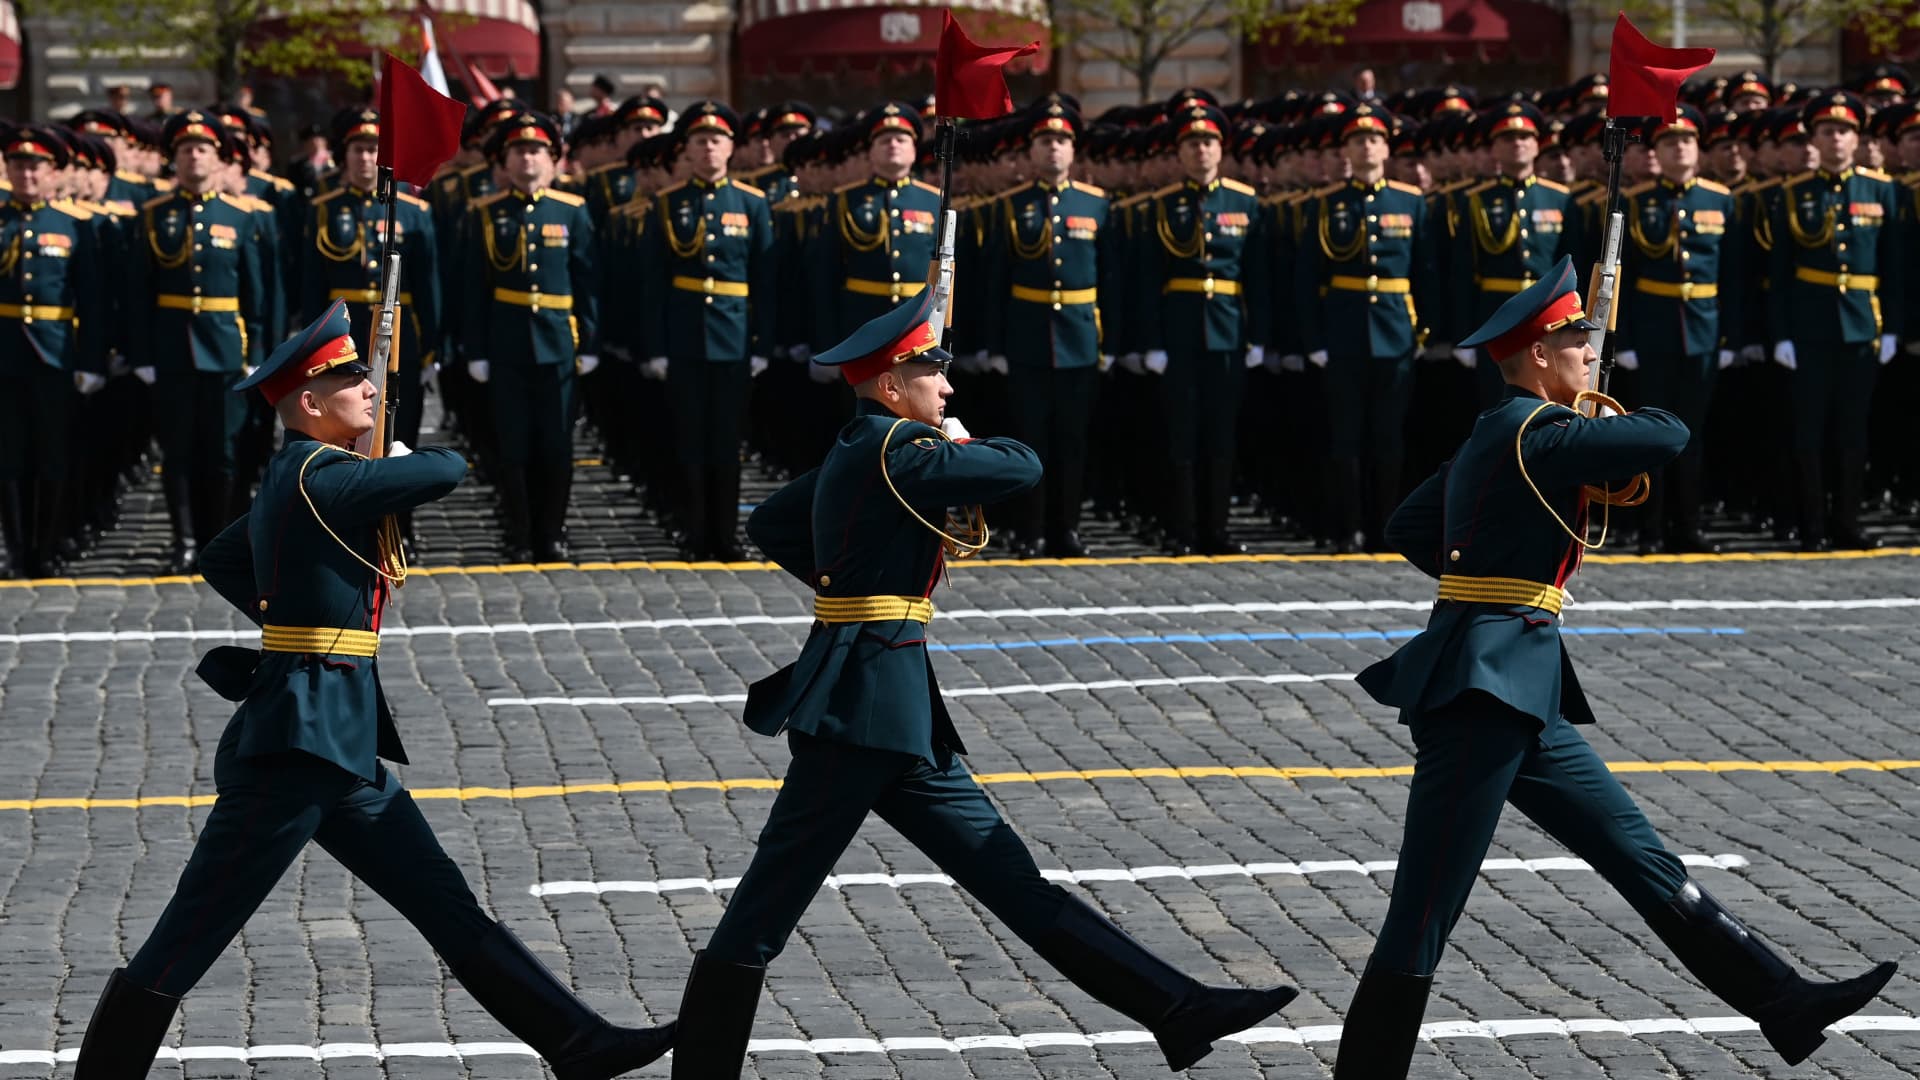 Russian honour guards march on Red Square during the Victory Day military parade in central Moscow on May 9, 2022.